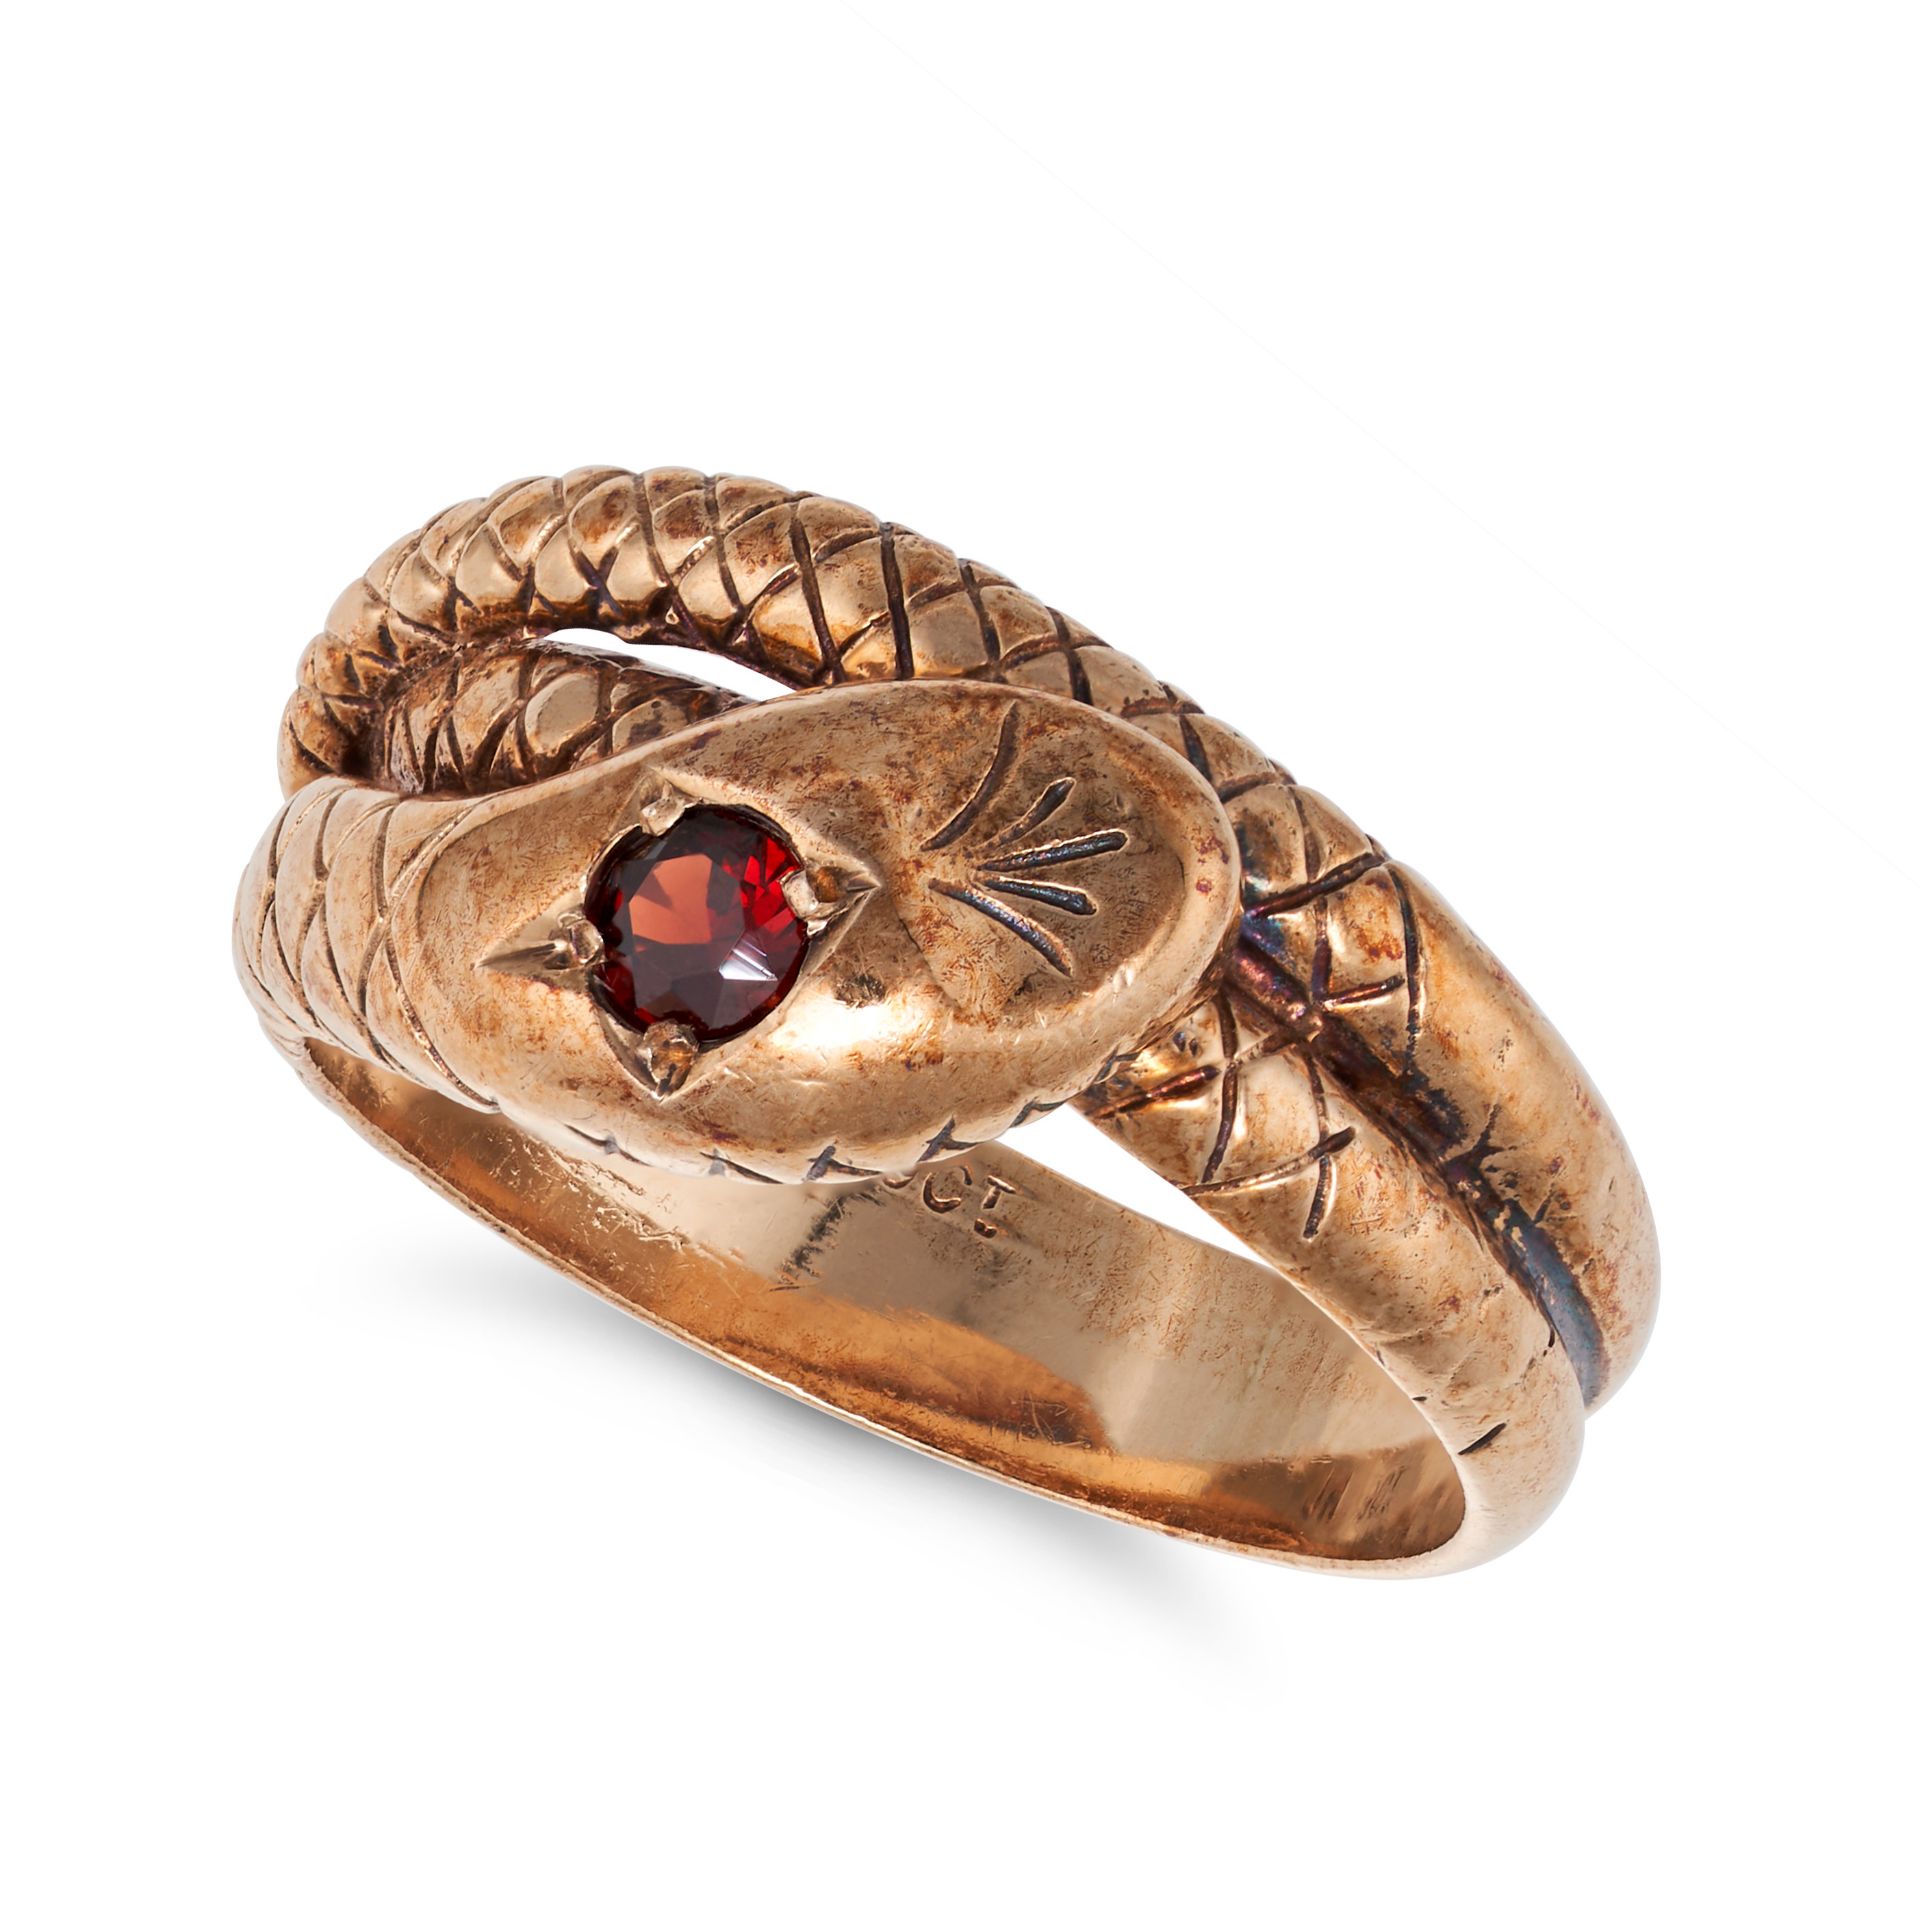 NO RESERVE - AN ANTIQUE GARNET SNAKE RING in 9ct yellow gold, designed as an engraved coiled snak...